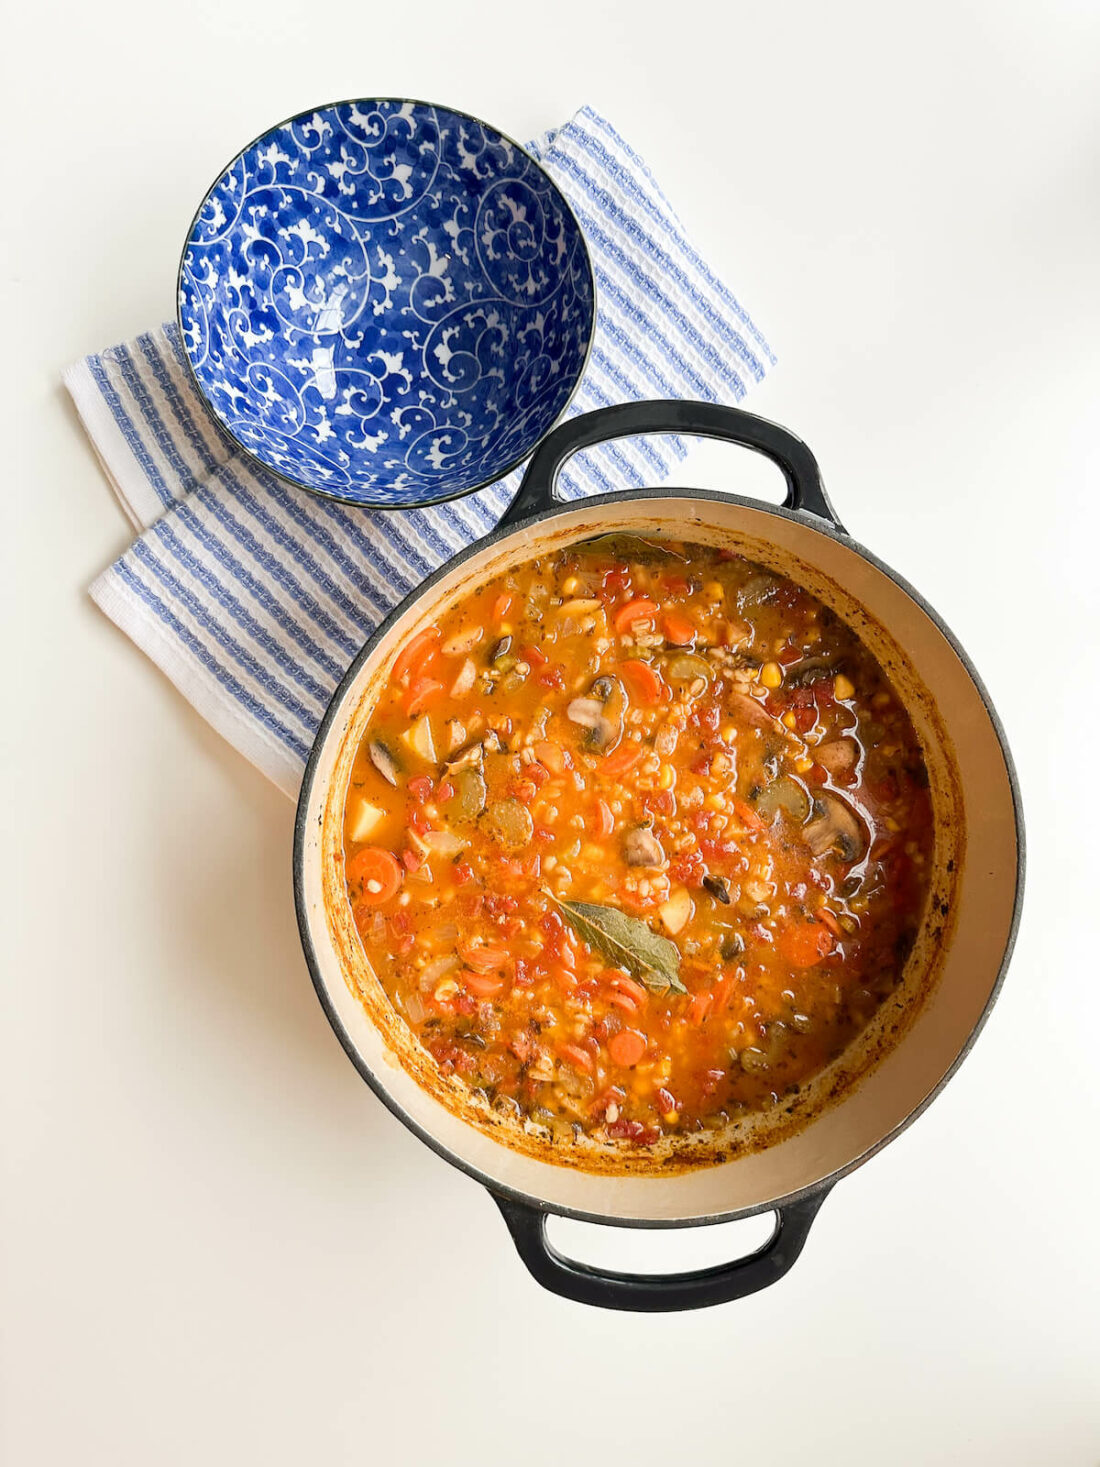 This Easy Vegetable Barley Soup recipe will warm you up and keep full in the cold winter months.